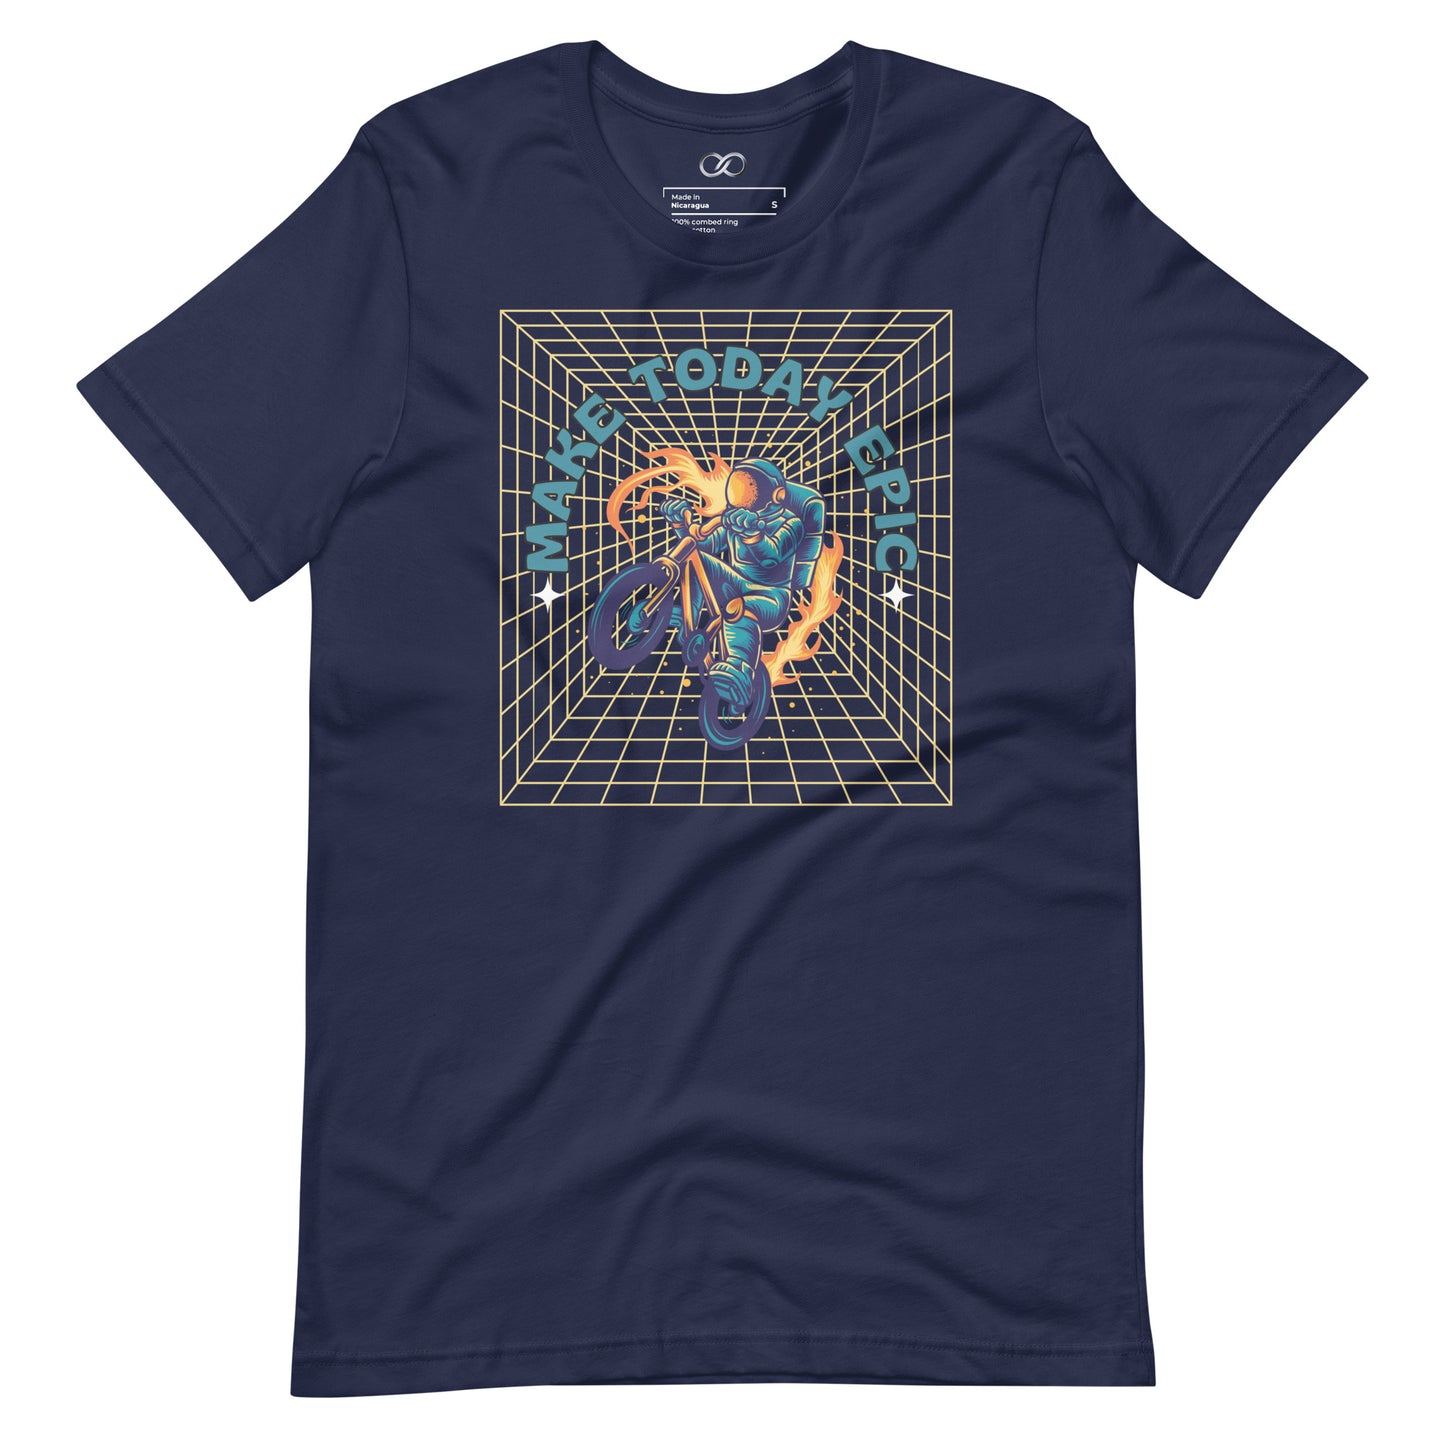 Navy relaxed fit t-shirt with a unique graphic of a cyclist in space, captioned 'Make Today Epic'.